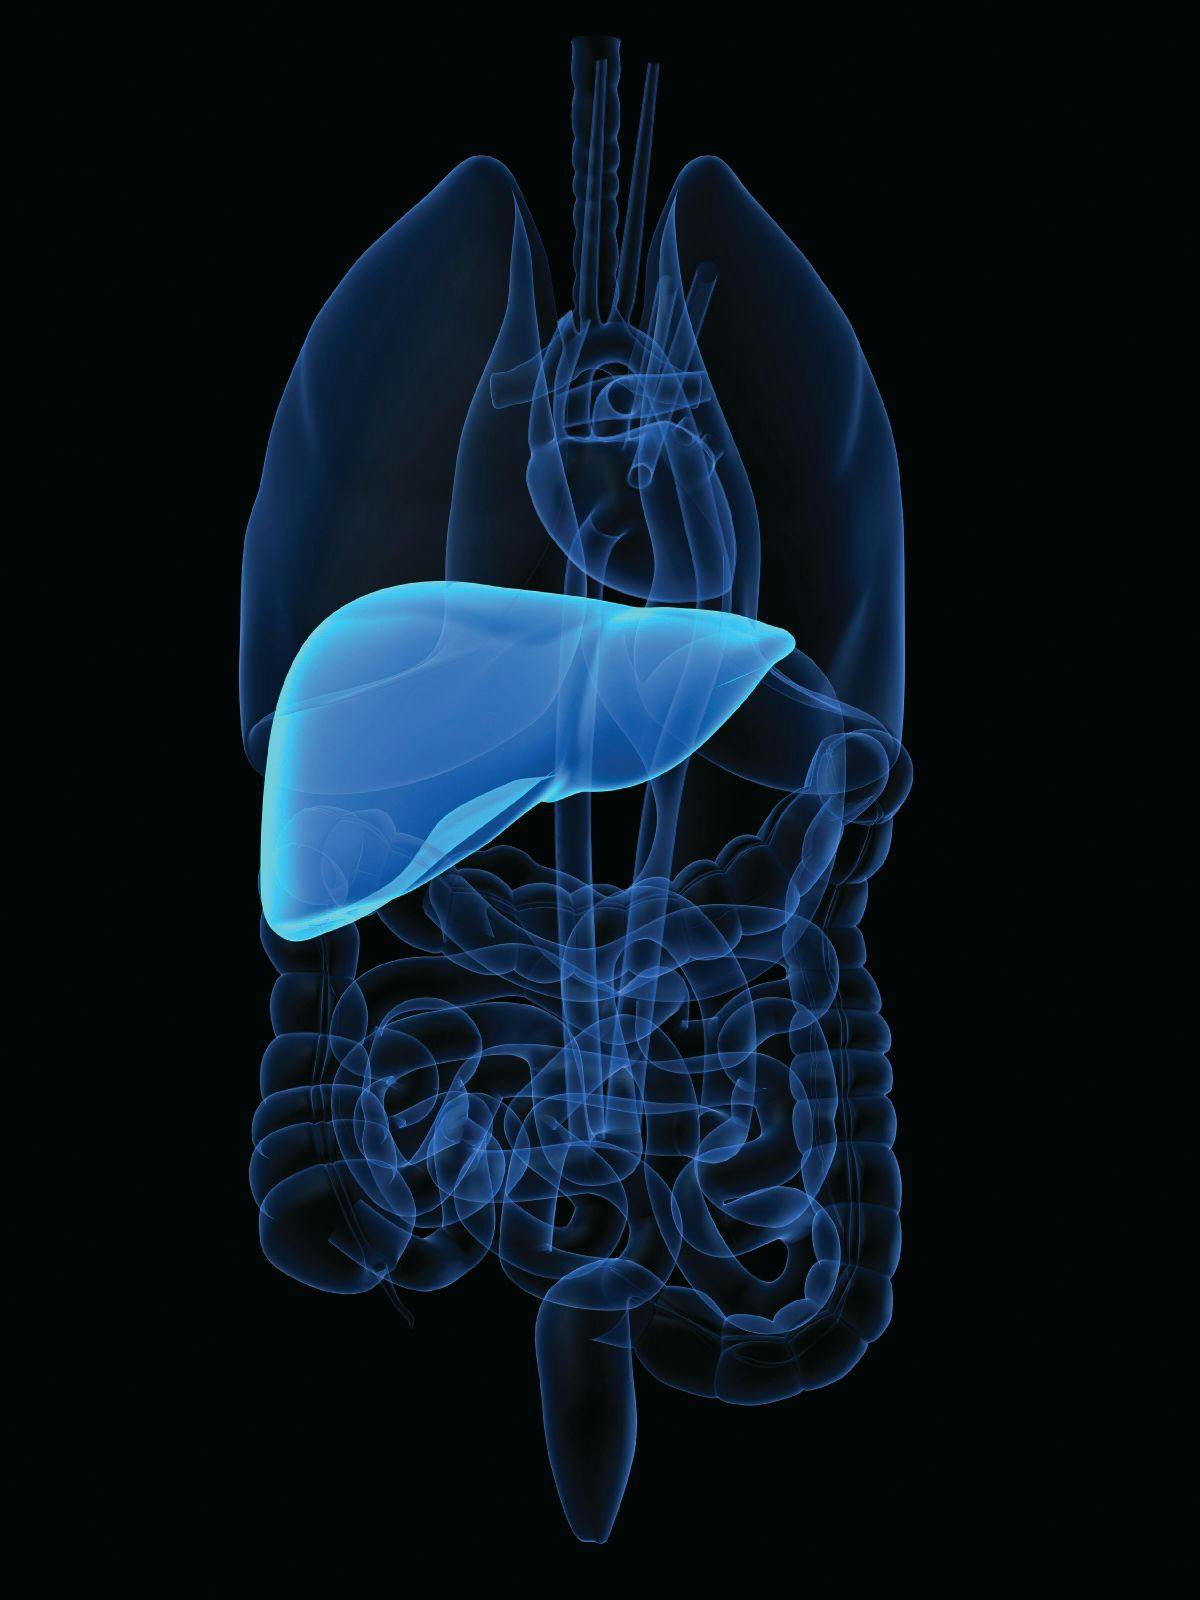 Patients with unresectable hepatocellular carcinoma appeared to benefit from treatment with durvalumab and tremelimumab, according to findings from the phase 3 HIMALAYA trial.